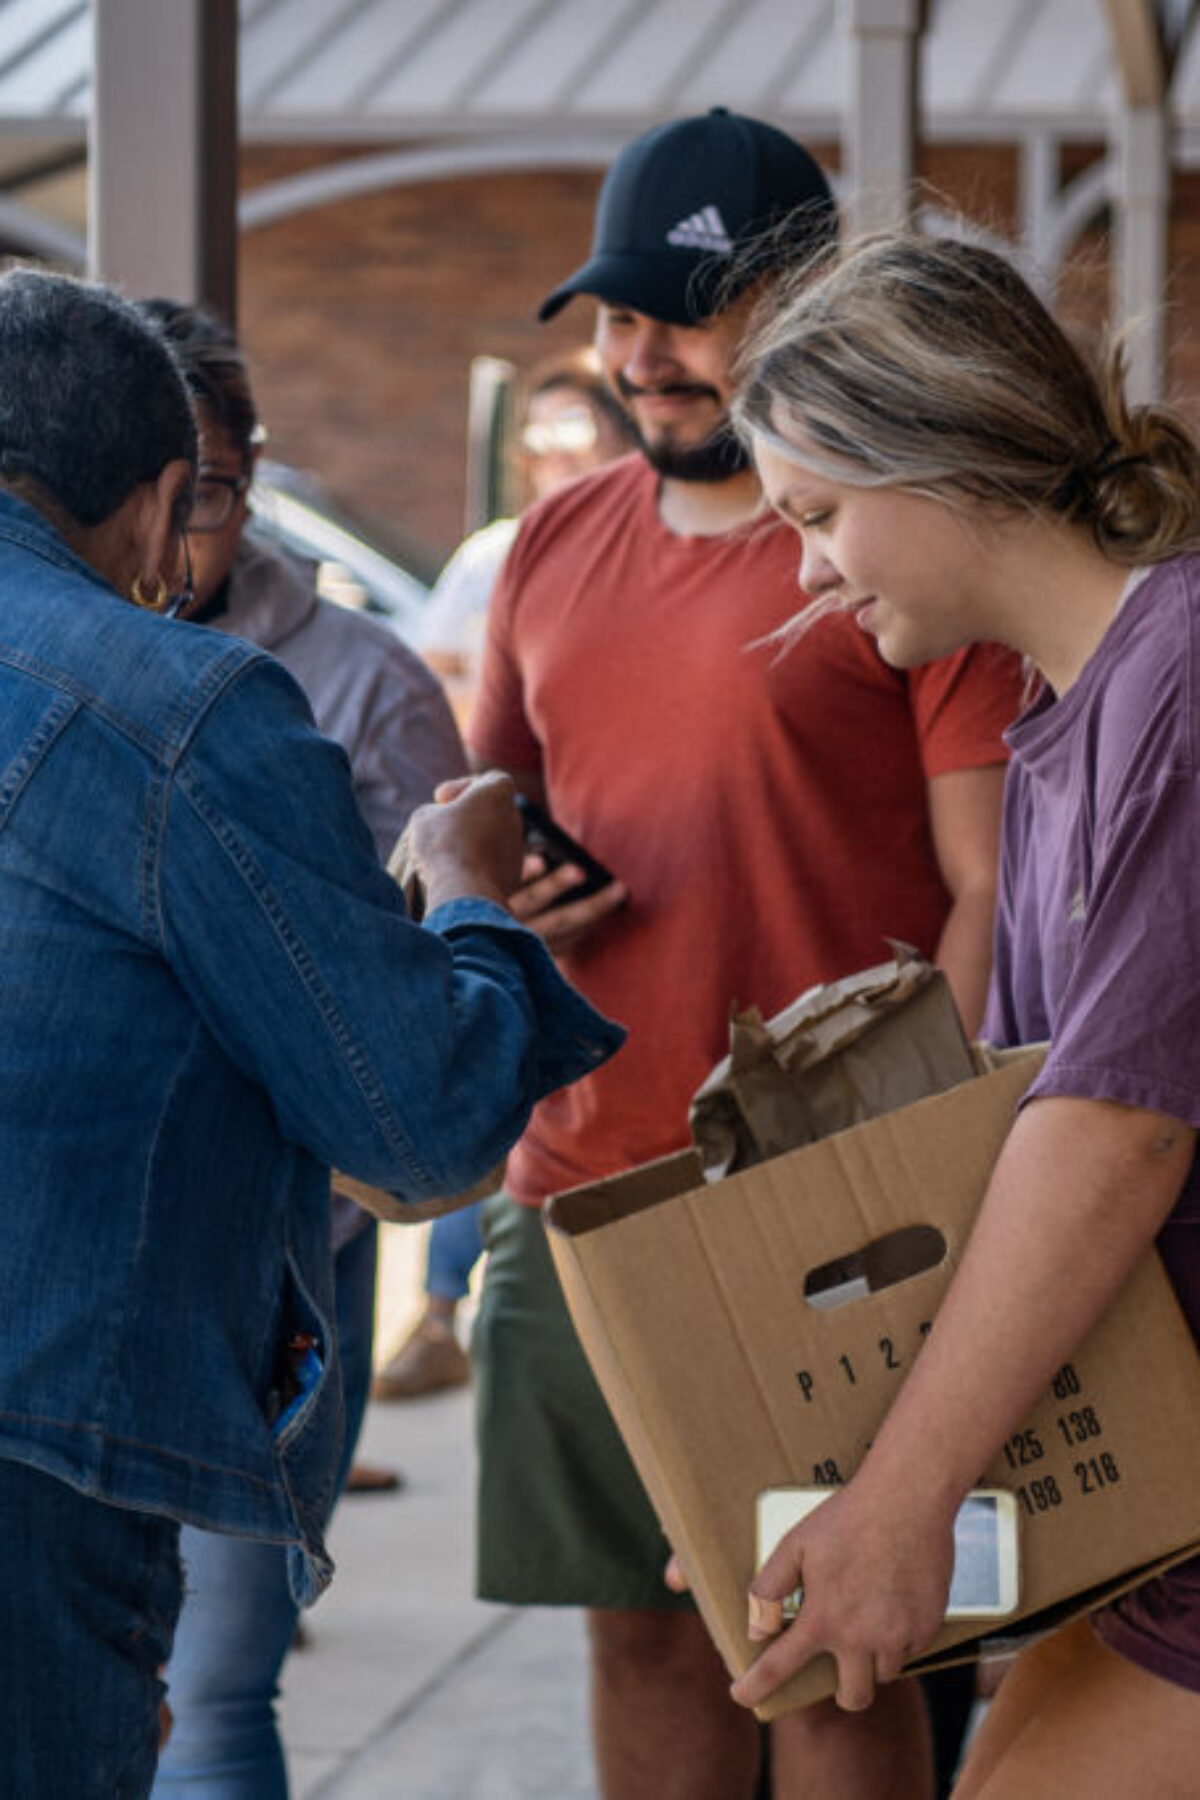 Uvalde community members distribute food to people waiting to donate blood at the South Texas Blood Bank's emergency blood drive on May 25, 2022.